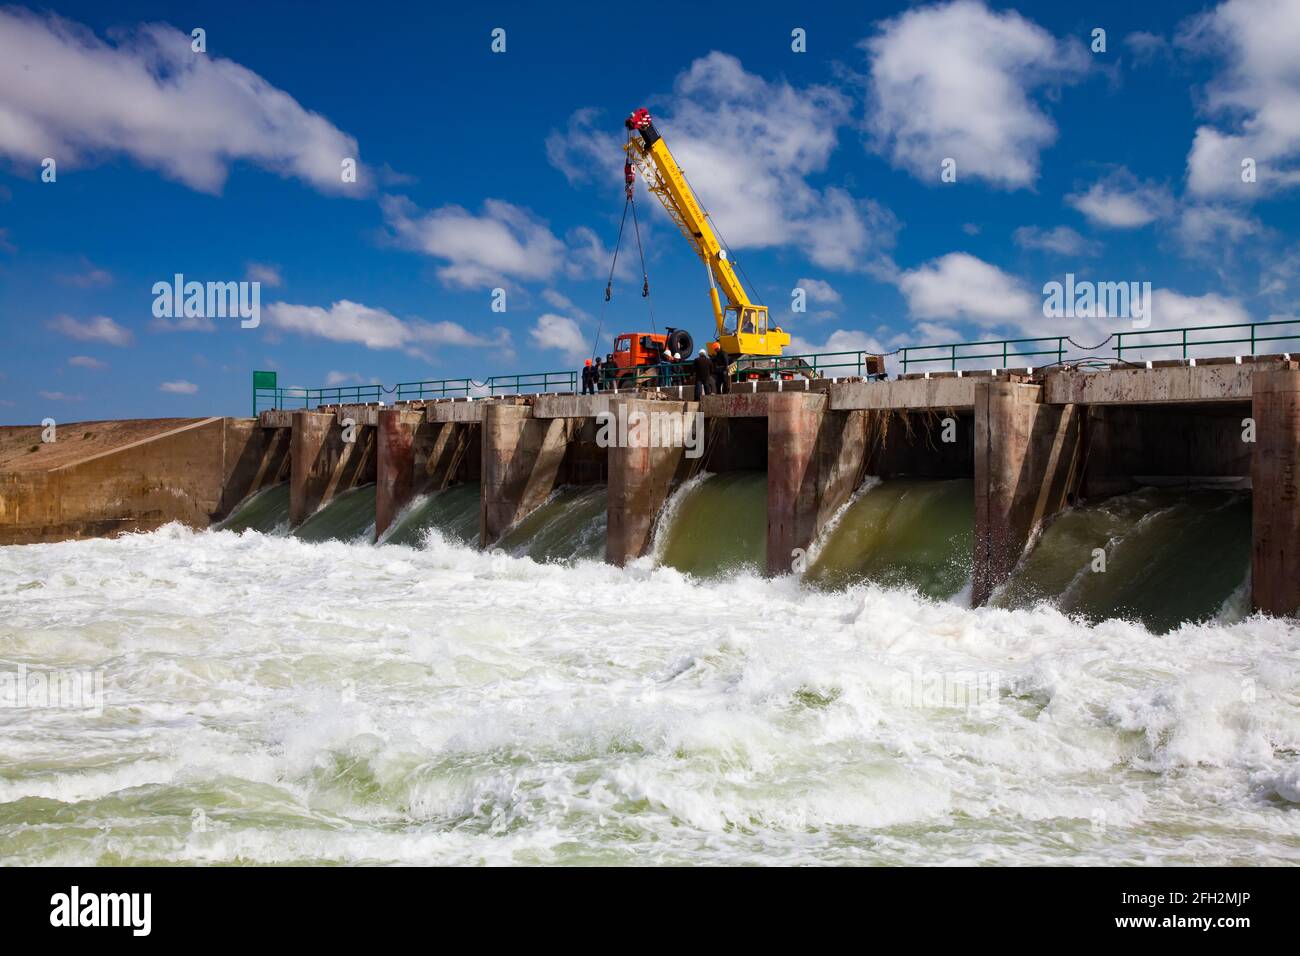 Kok-aral, Kazakhstan: Aral Sea Kok-aral dam. Water discharge in flood.Open shutters.Yellow mobile crane and workers on dam. Stock Photo